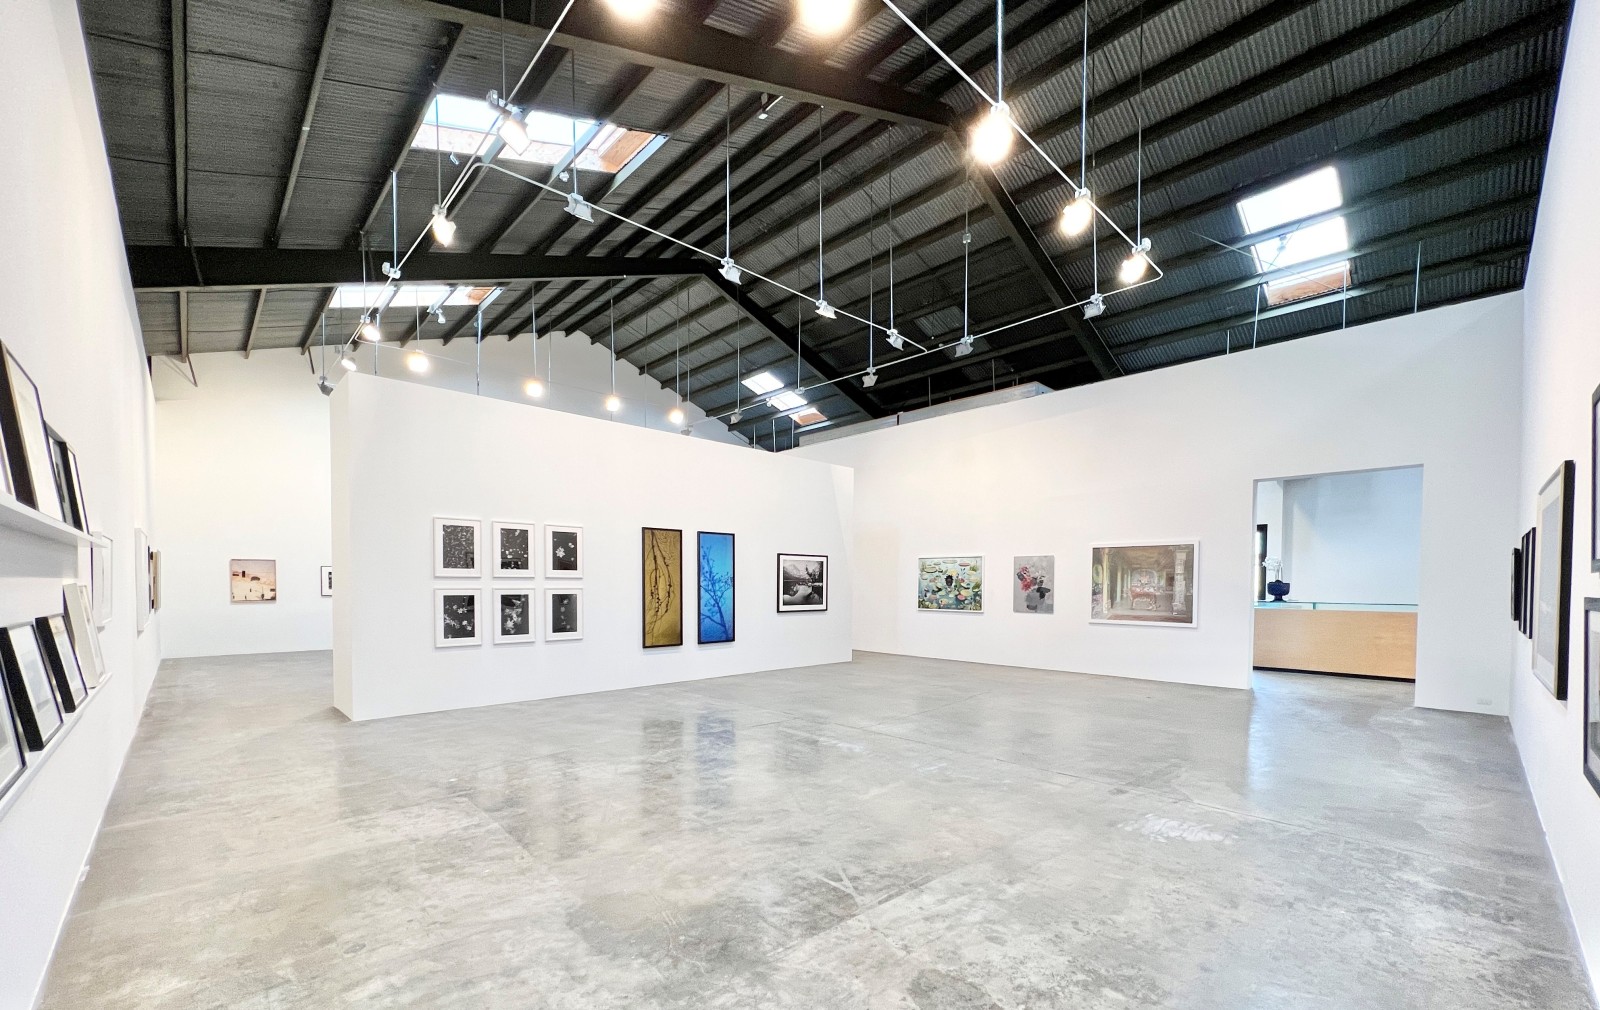 Installation view of Danziger Gallery with framed photographs hanging on walls.